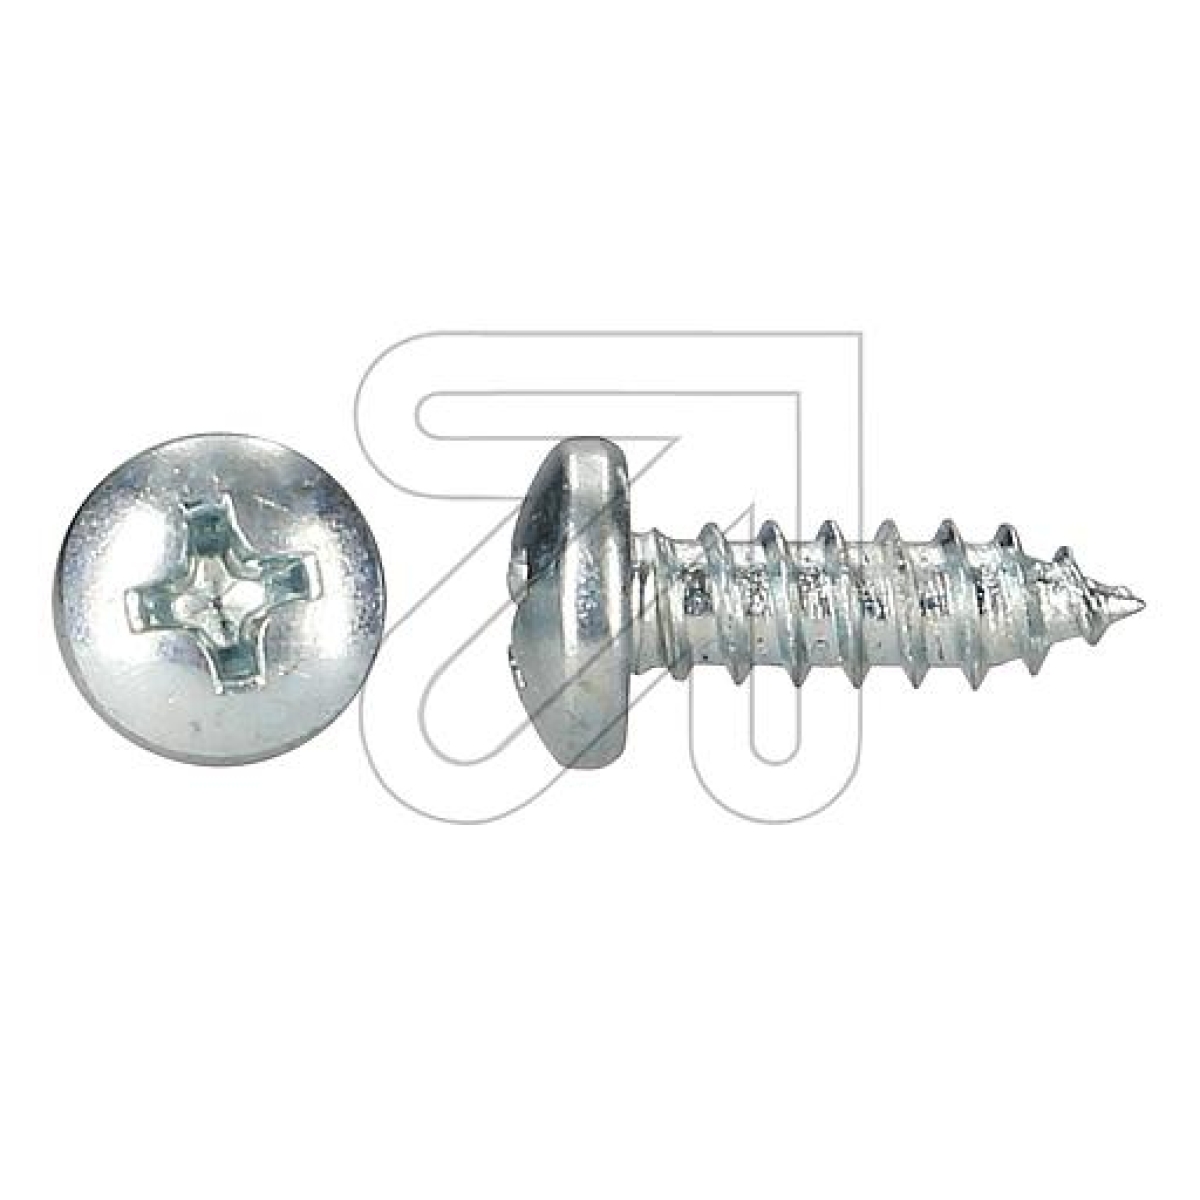 EGBPan head self tapping screws PH 4.2x13-Price for 100 pcs.Article-No: 196045